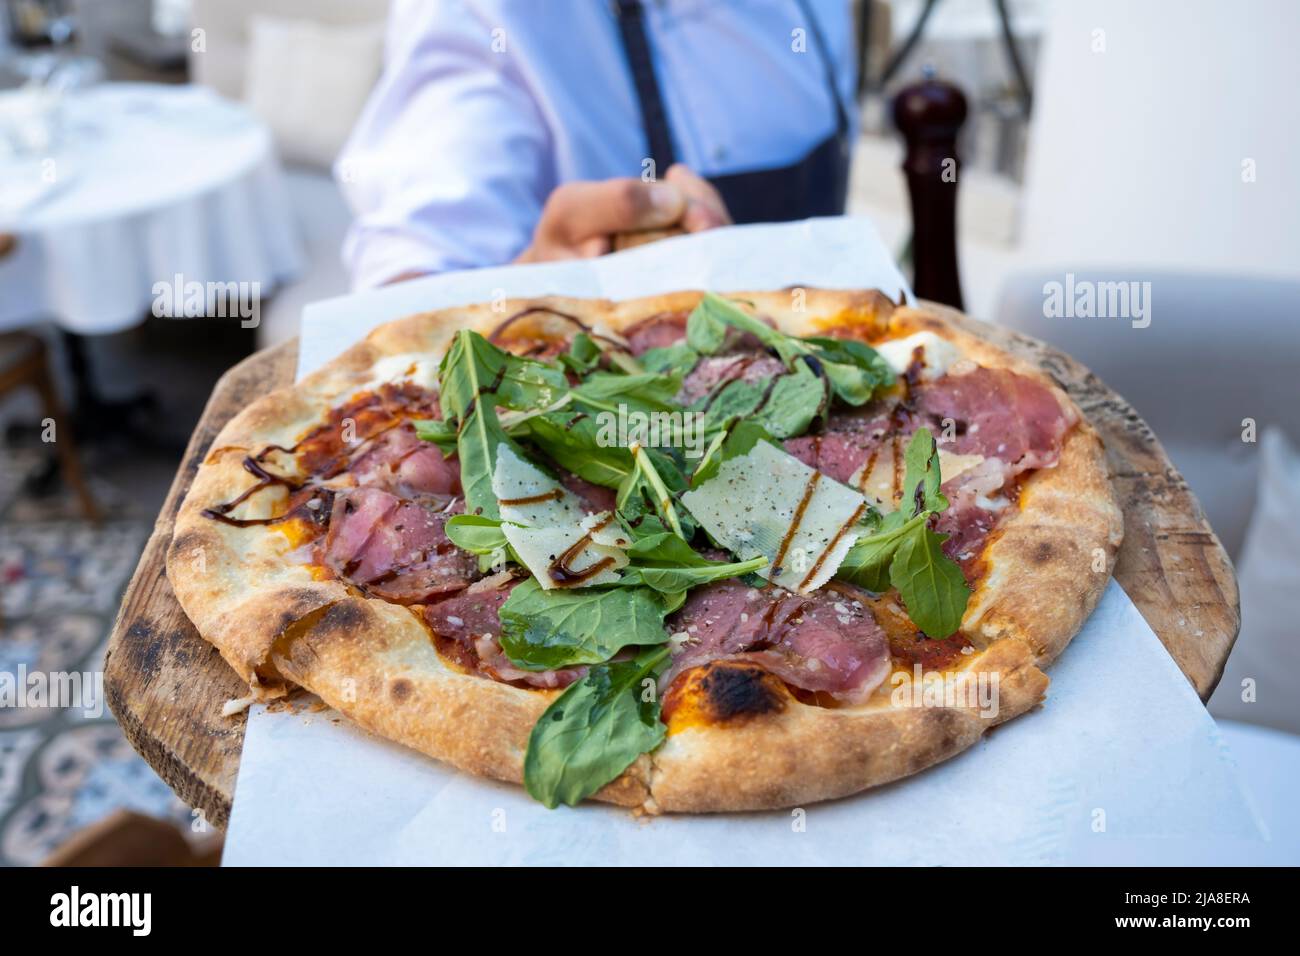 Wooden pizza plate in chef's hands and meat pizza with mozzarella cheese and arugula leaves Stock Photo